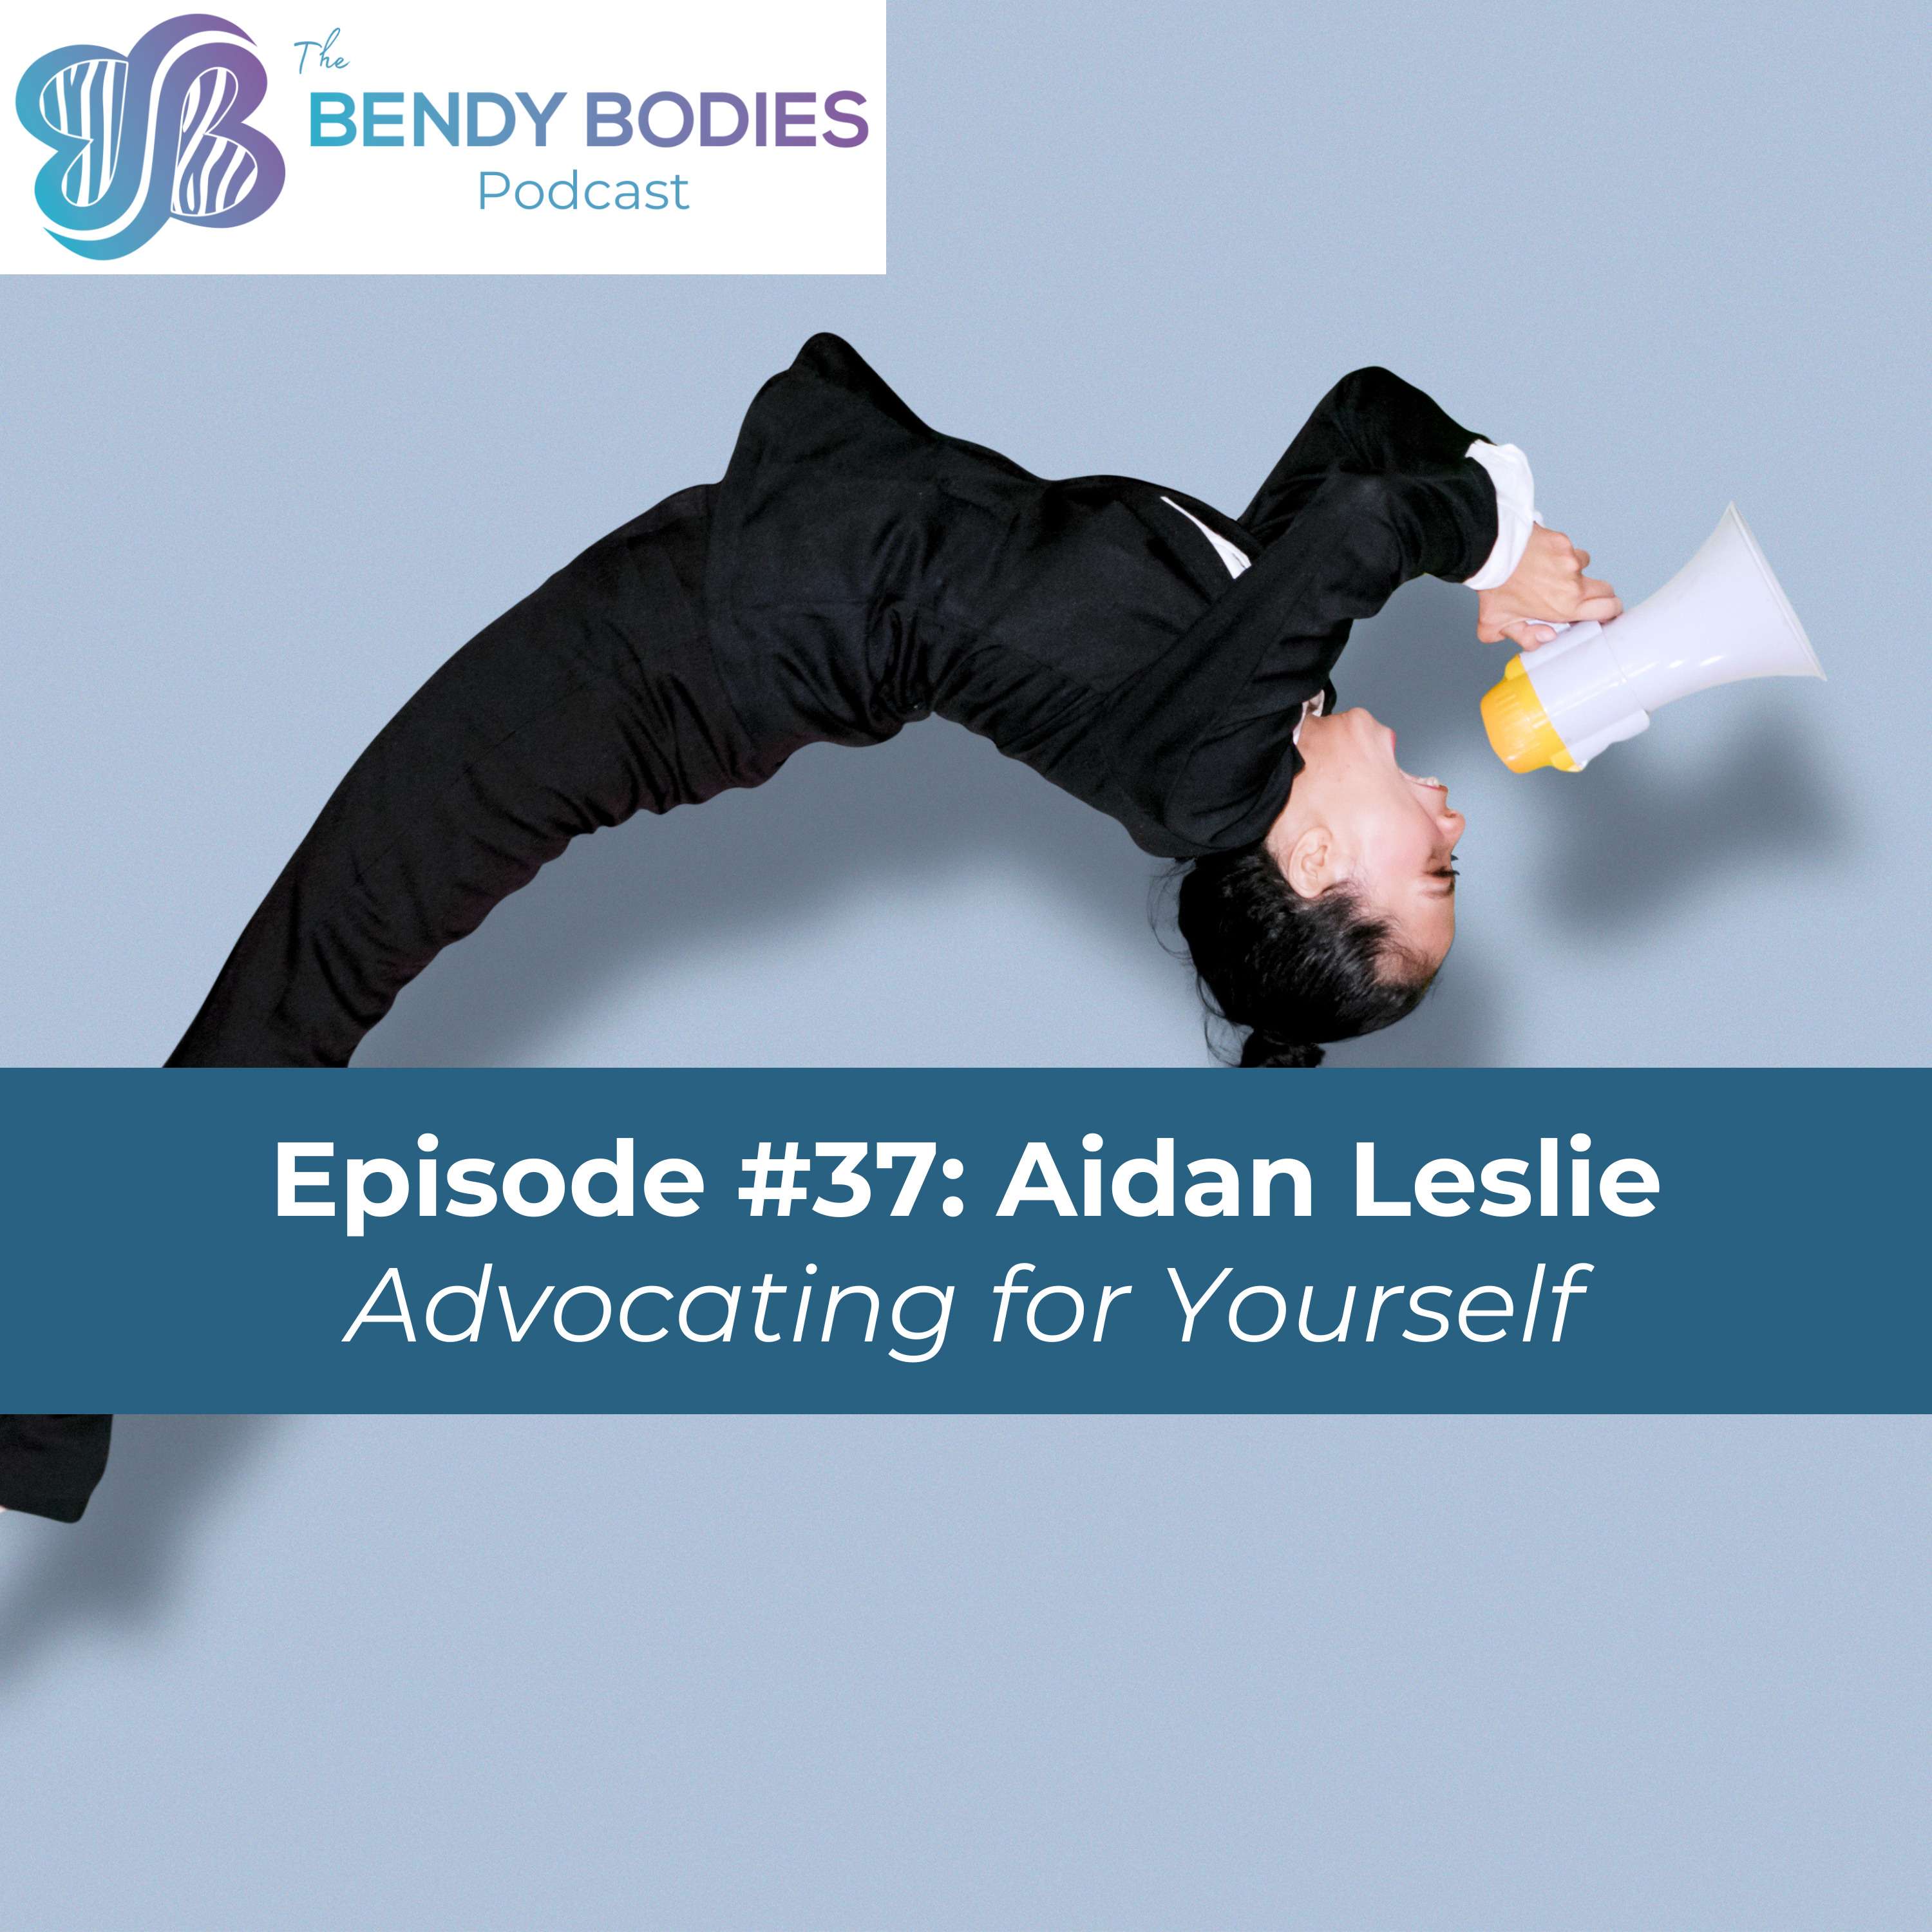 37. Advocating for Yourself with Aidan Leslie